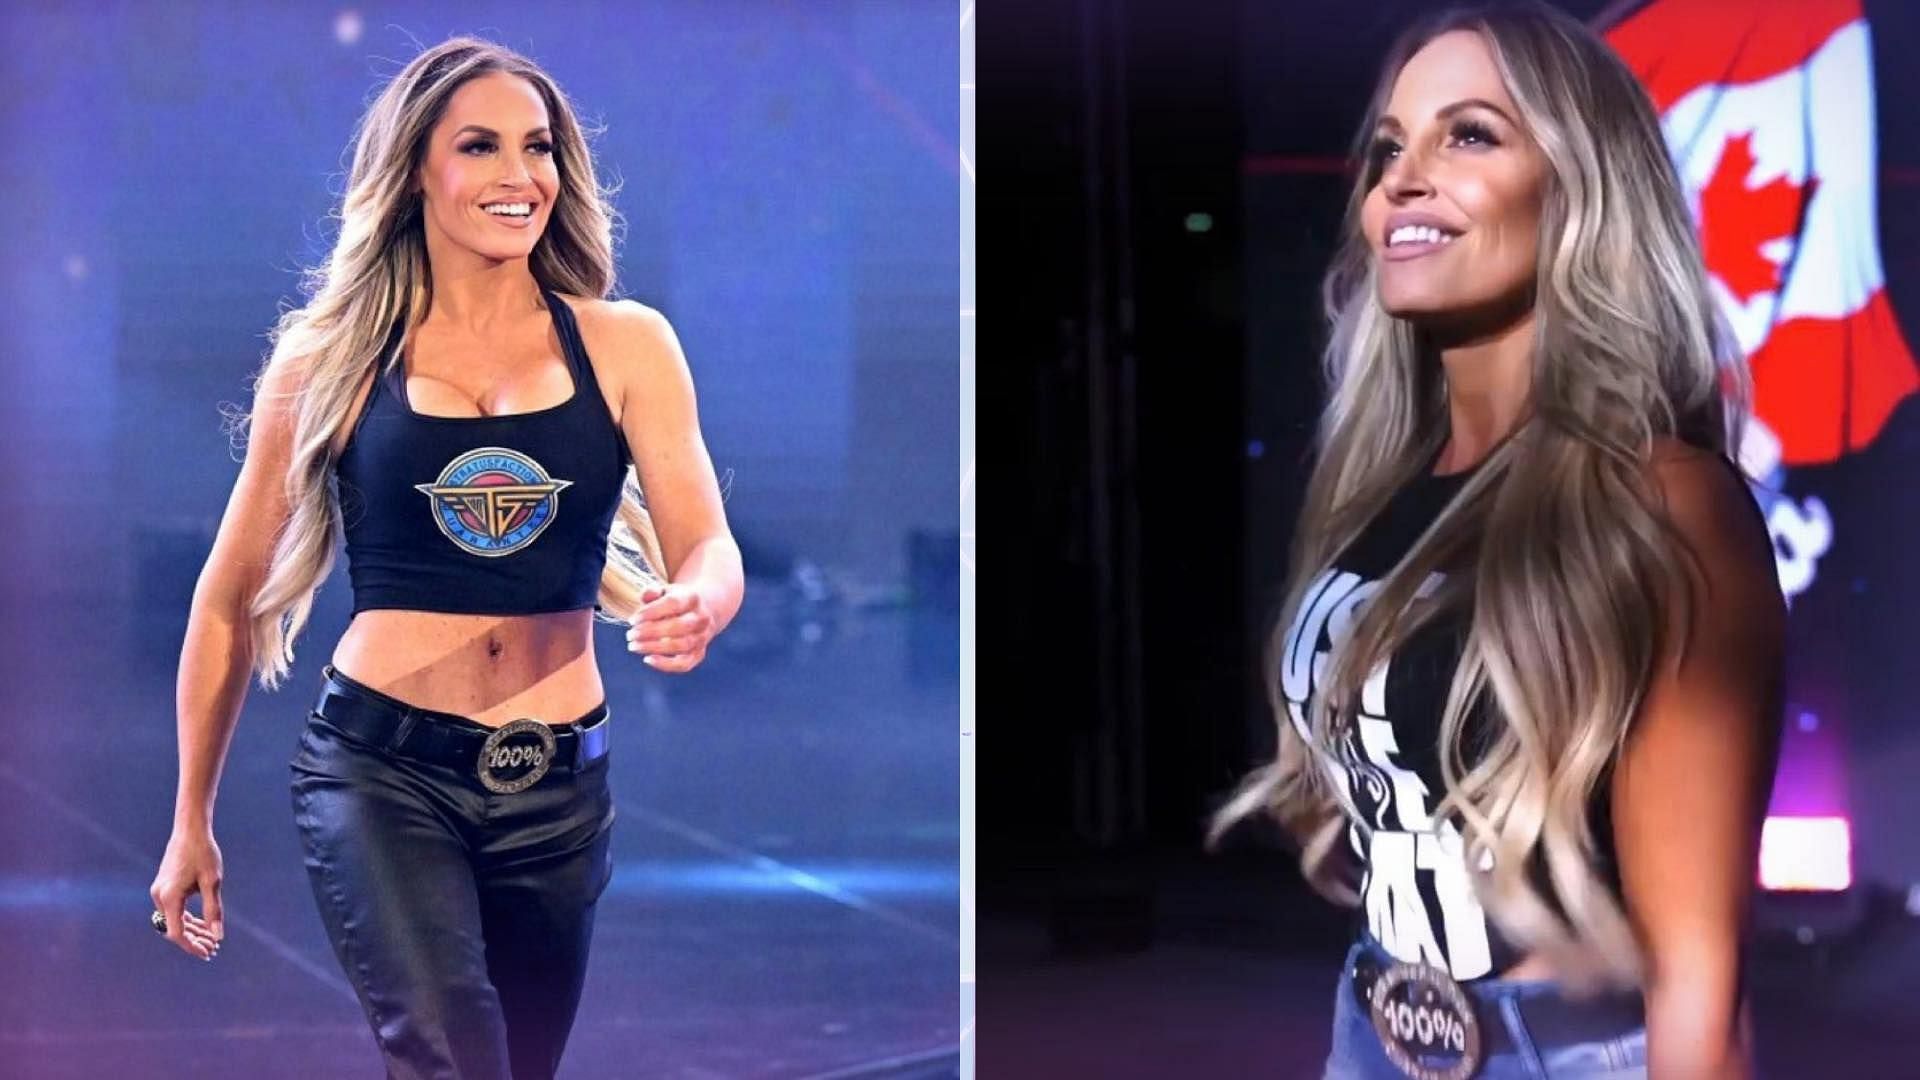 Trish Stratus could potentially turn heel in WWE